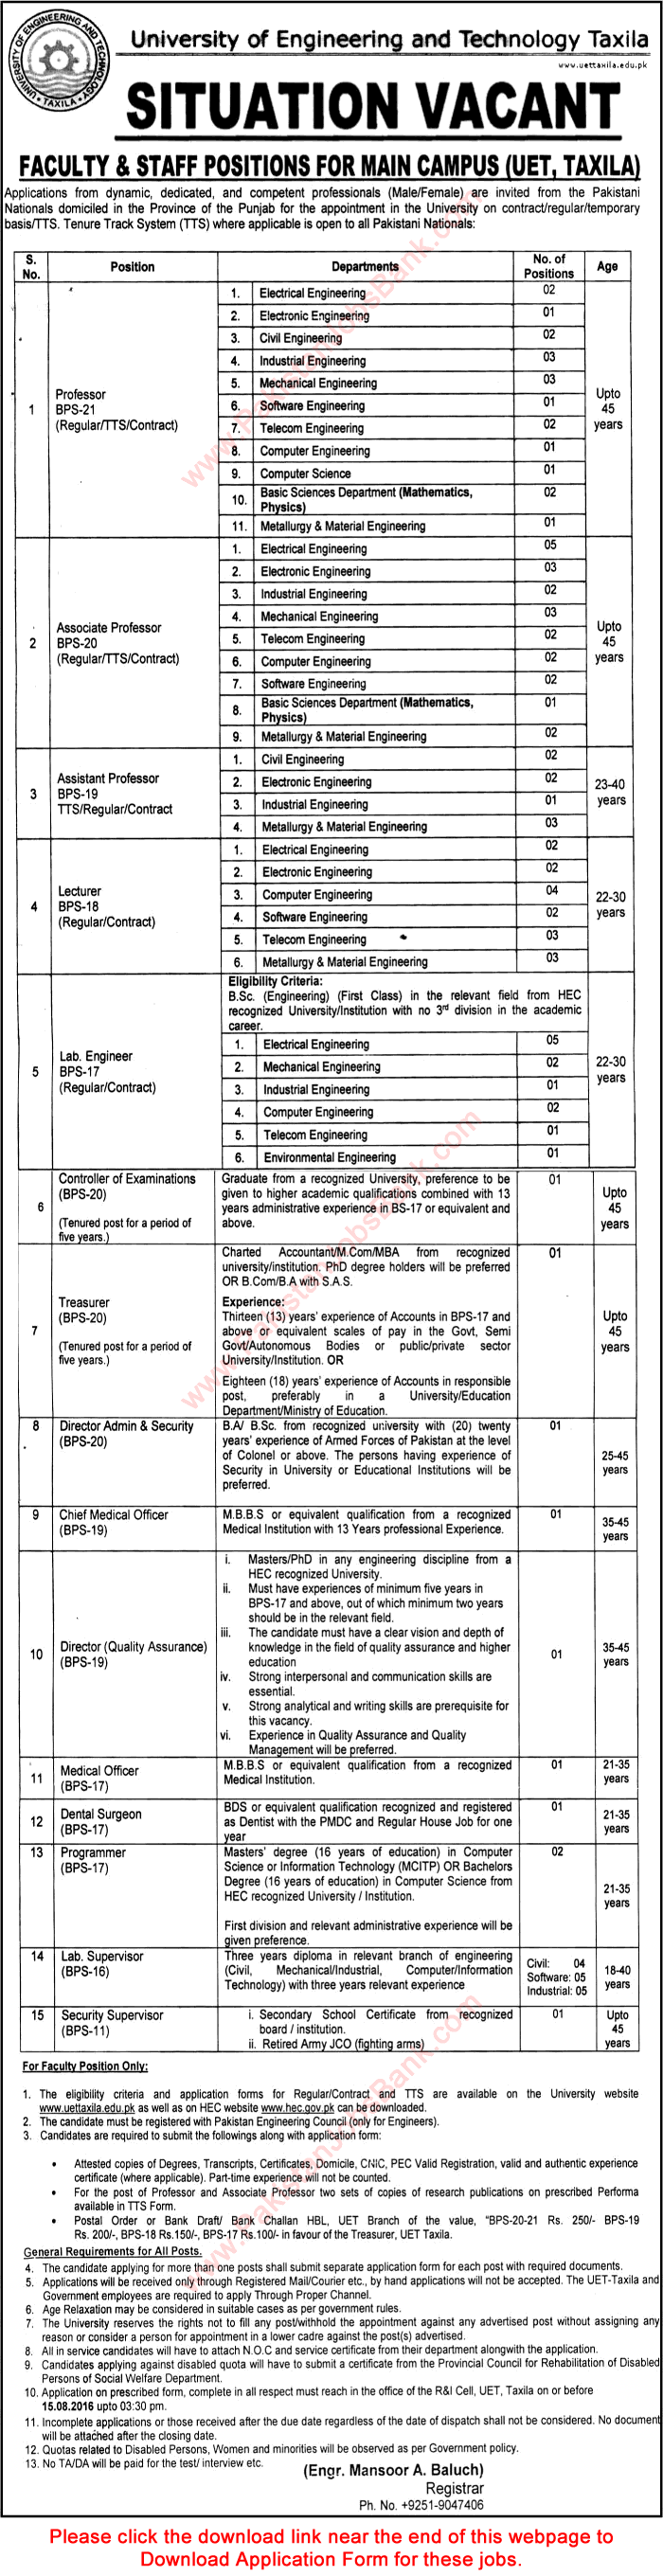 UET Taxila Jobs 2016 July / August Application Form Teaching Faculty, Lab Engineers & Others Latest